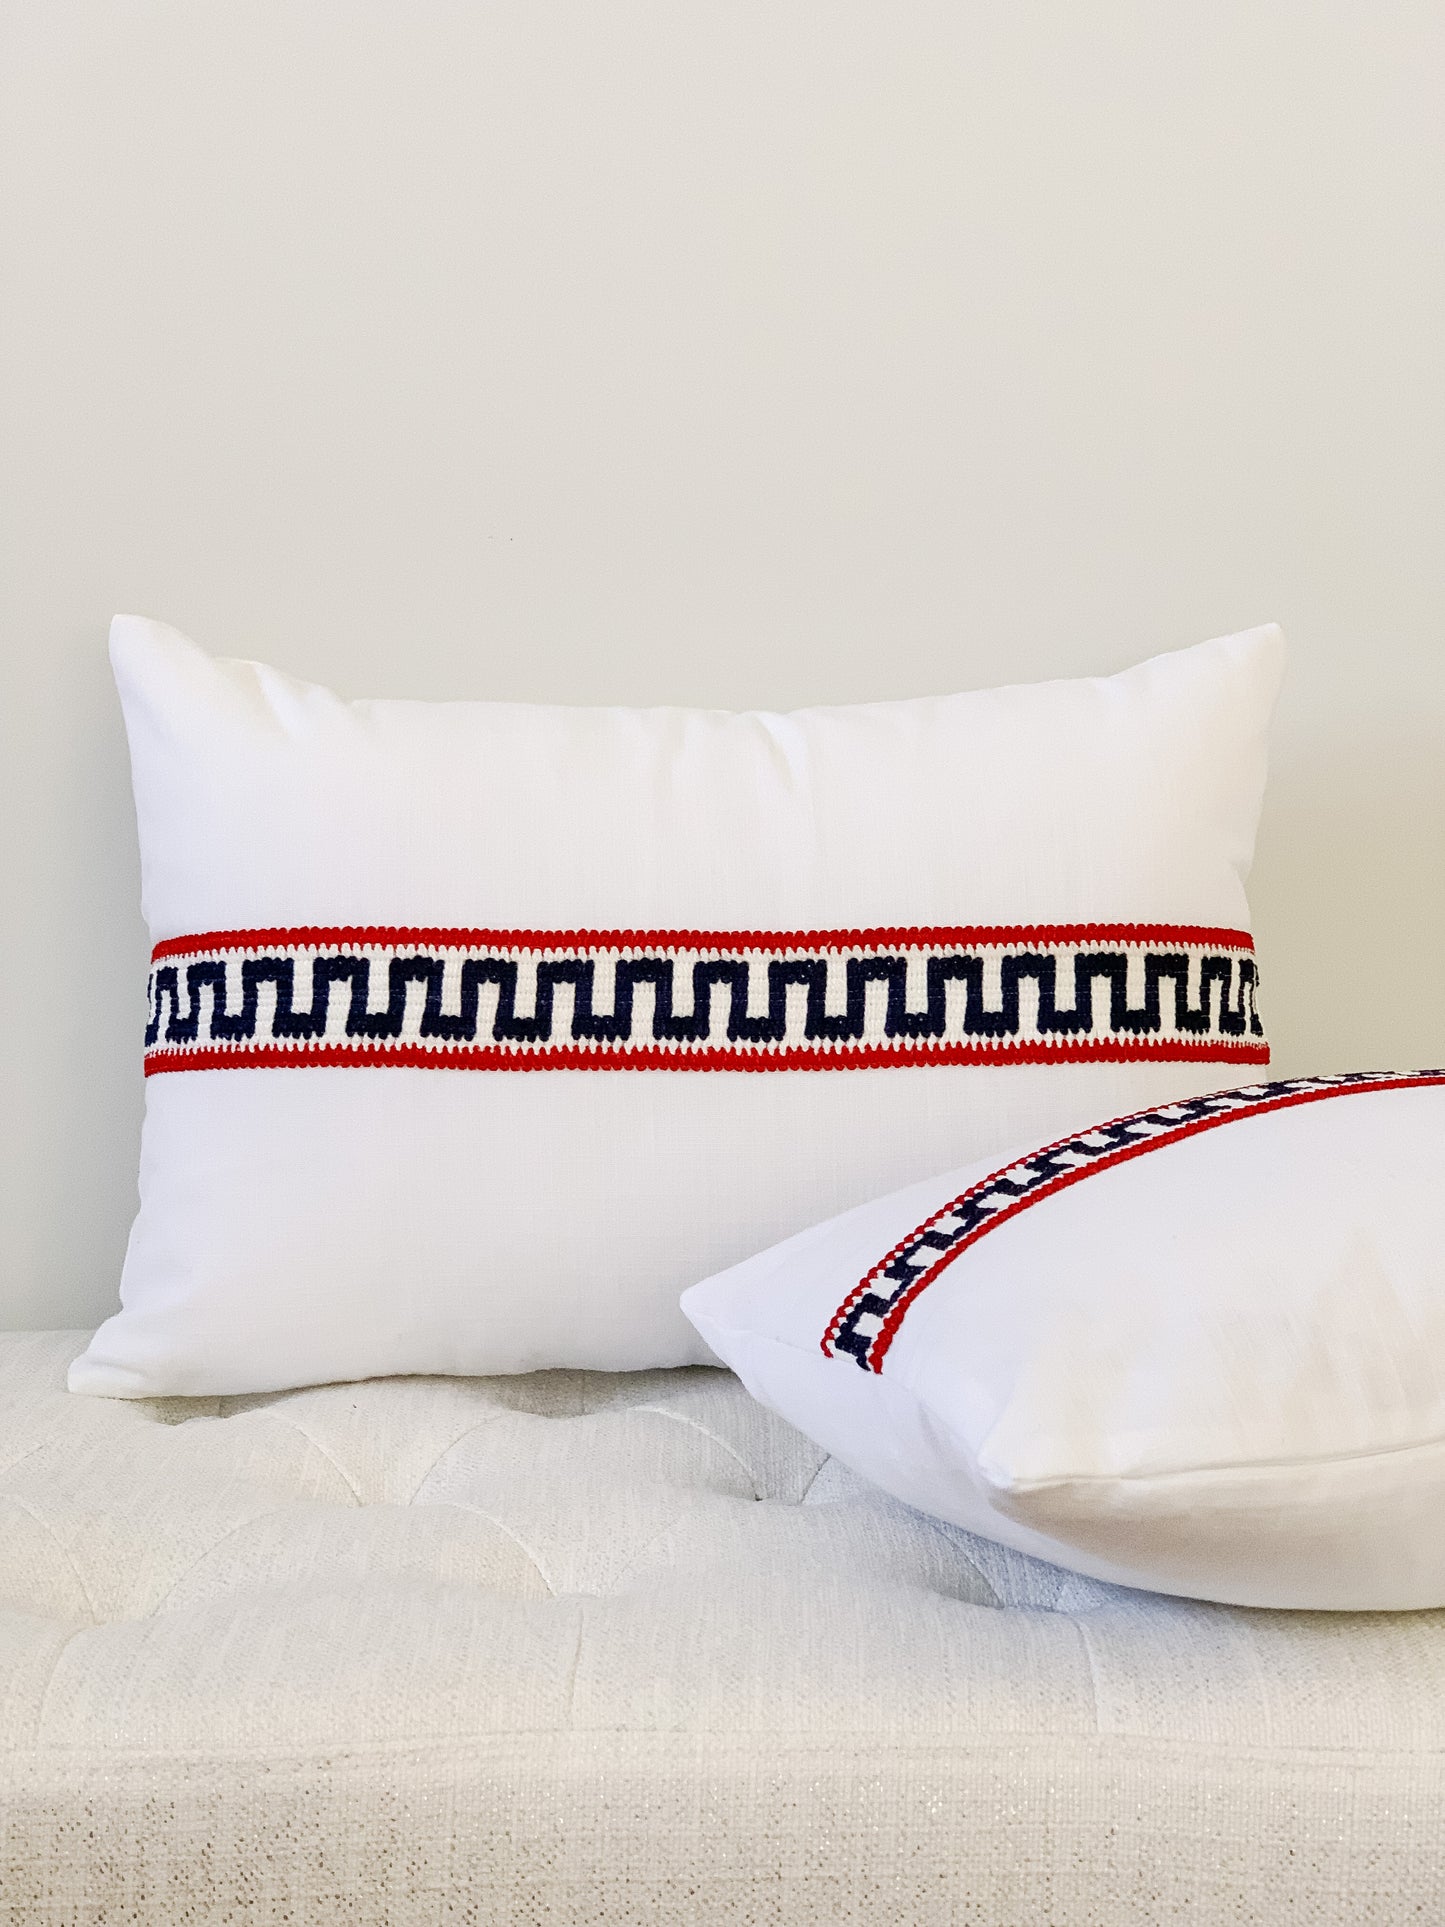 white cotton lumbar designer pillow with red white and blue decorative tape running across middle